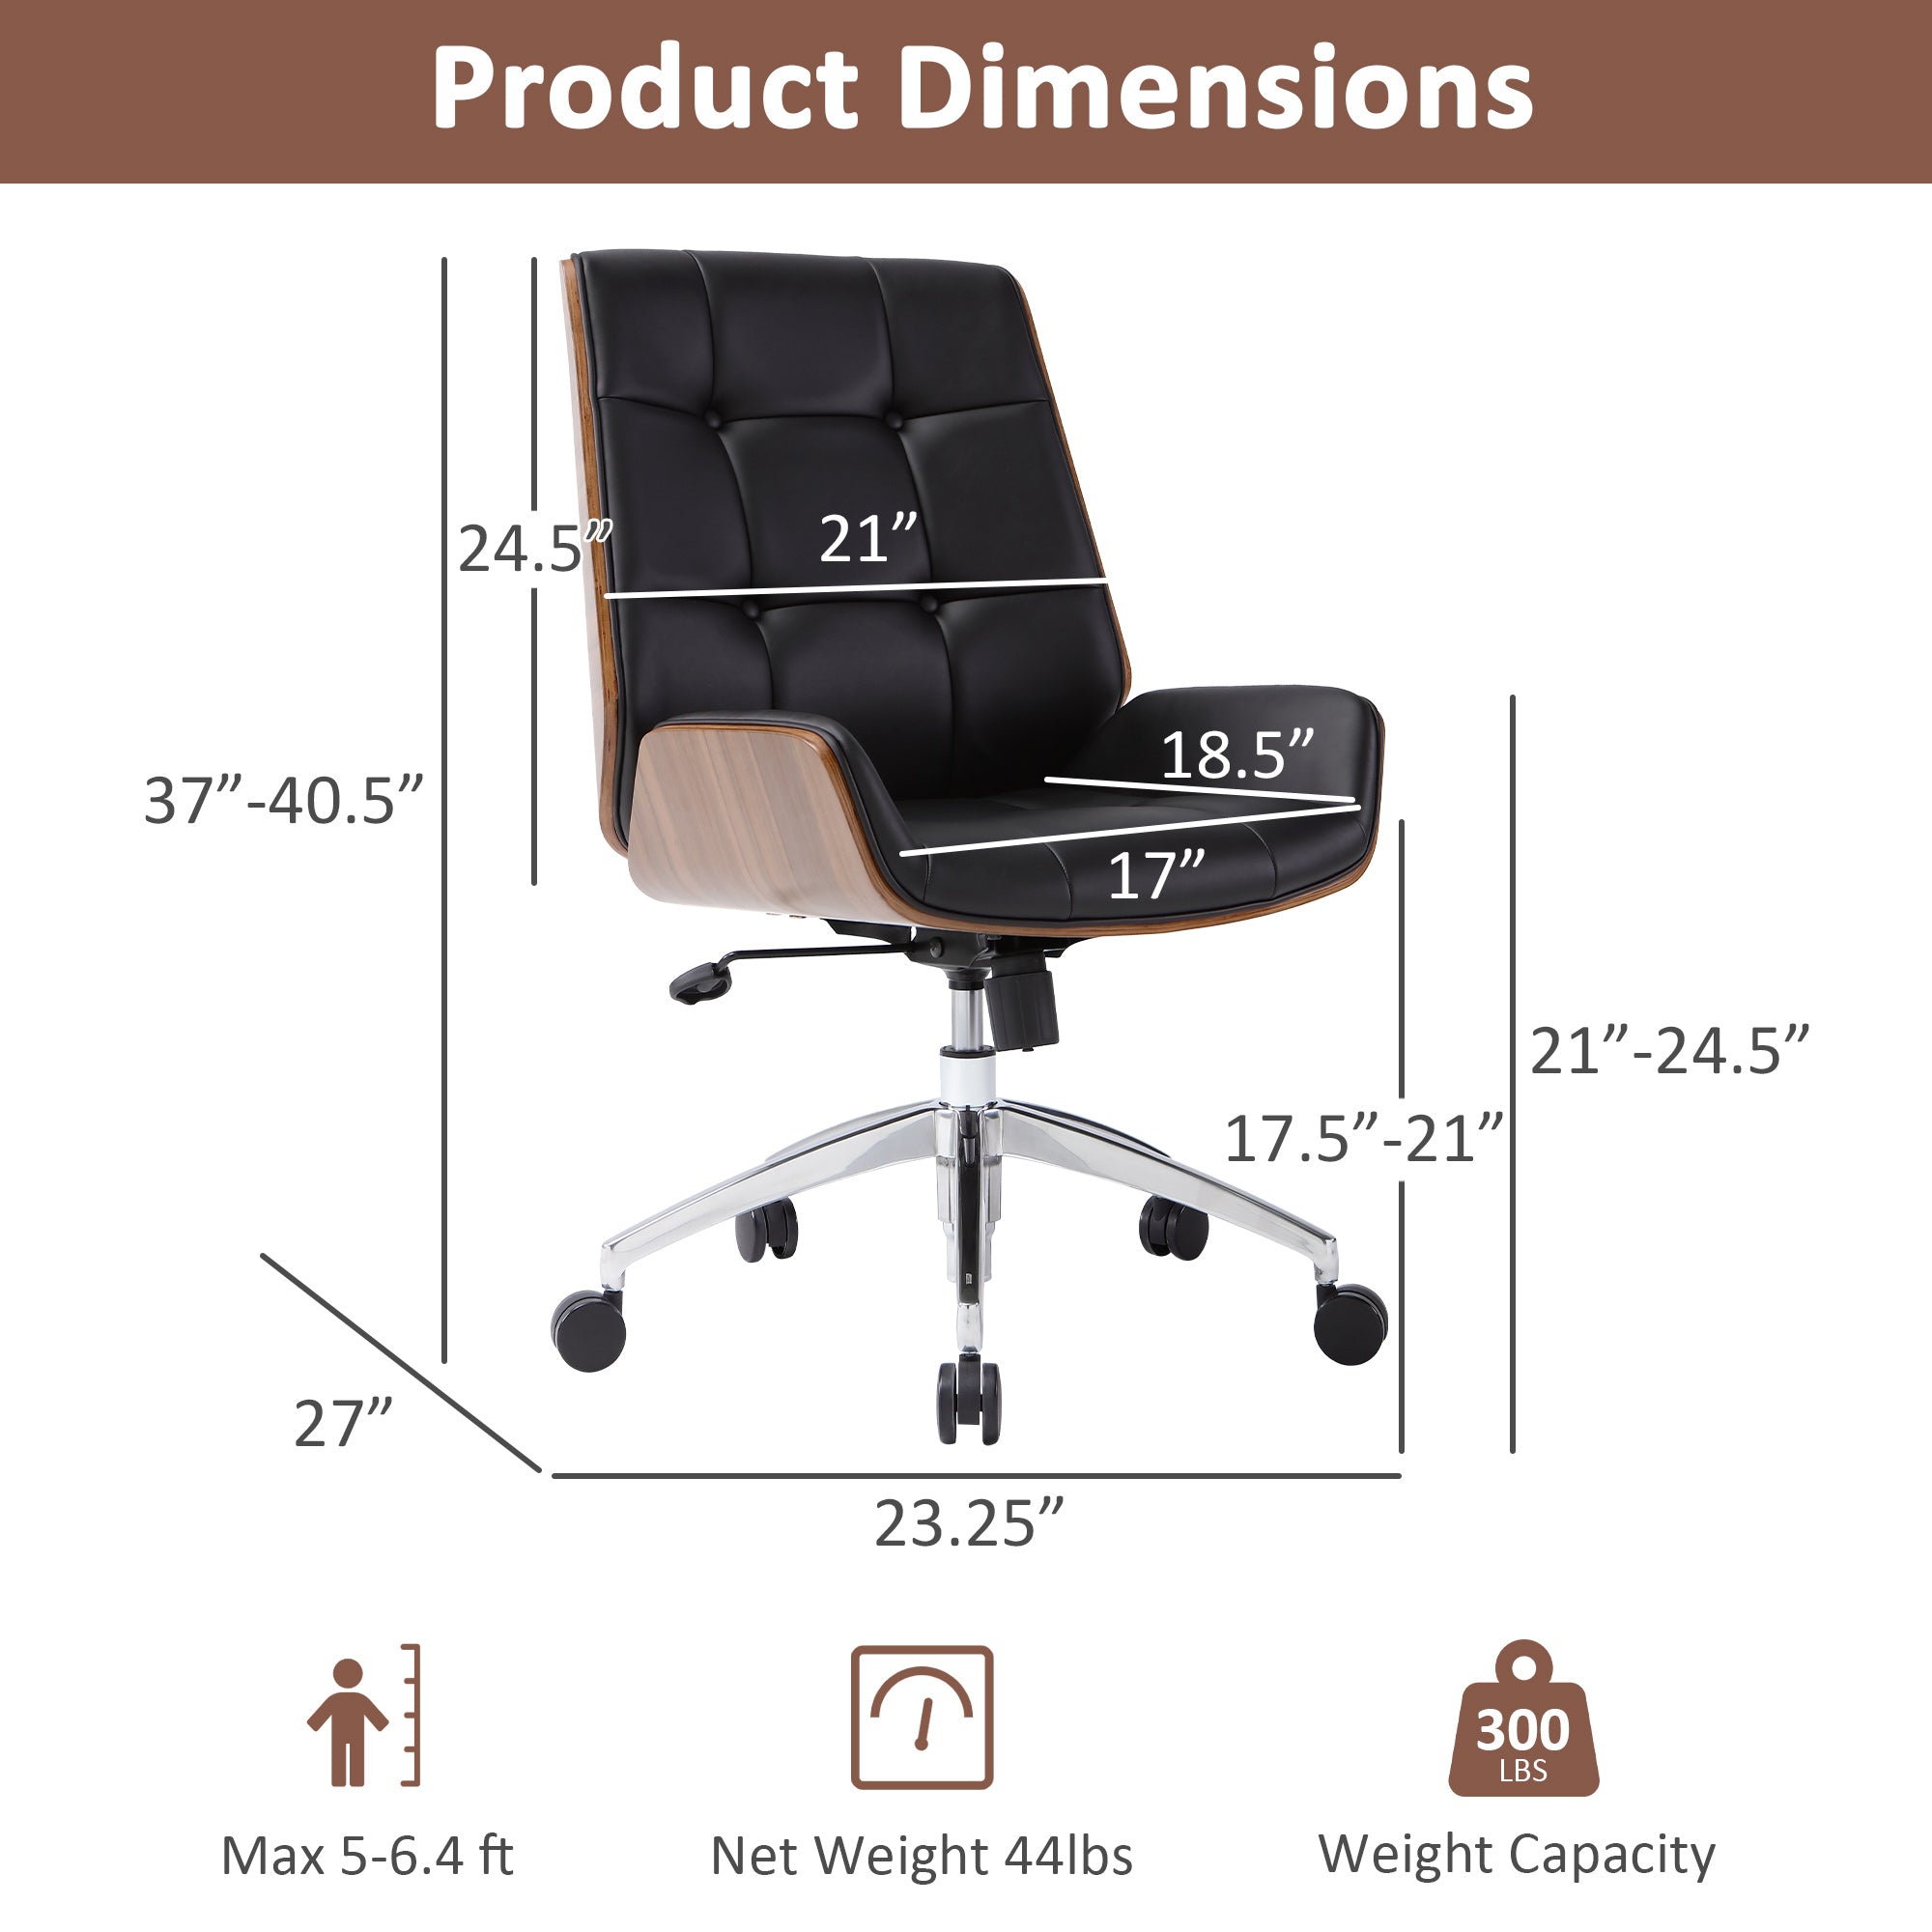 Executive Office Chair with Adjustable Height, Tilt Function, Solid Wood Arms and Base, 360° Swivel - Leather Office Chair for Office and Home Work in Black